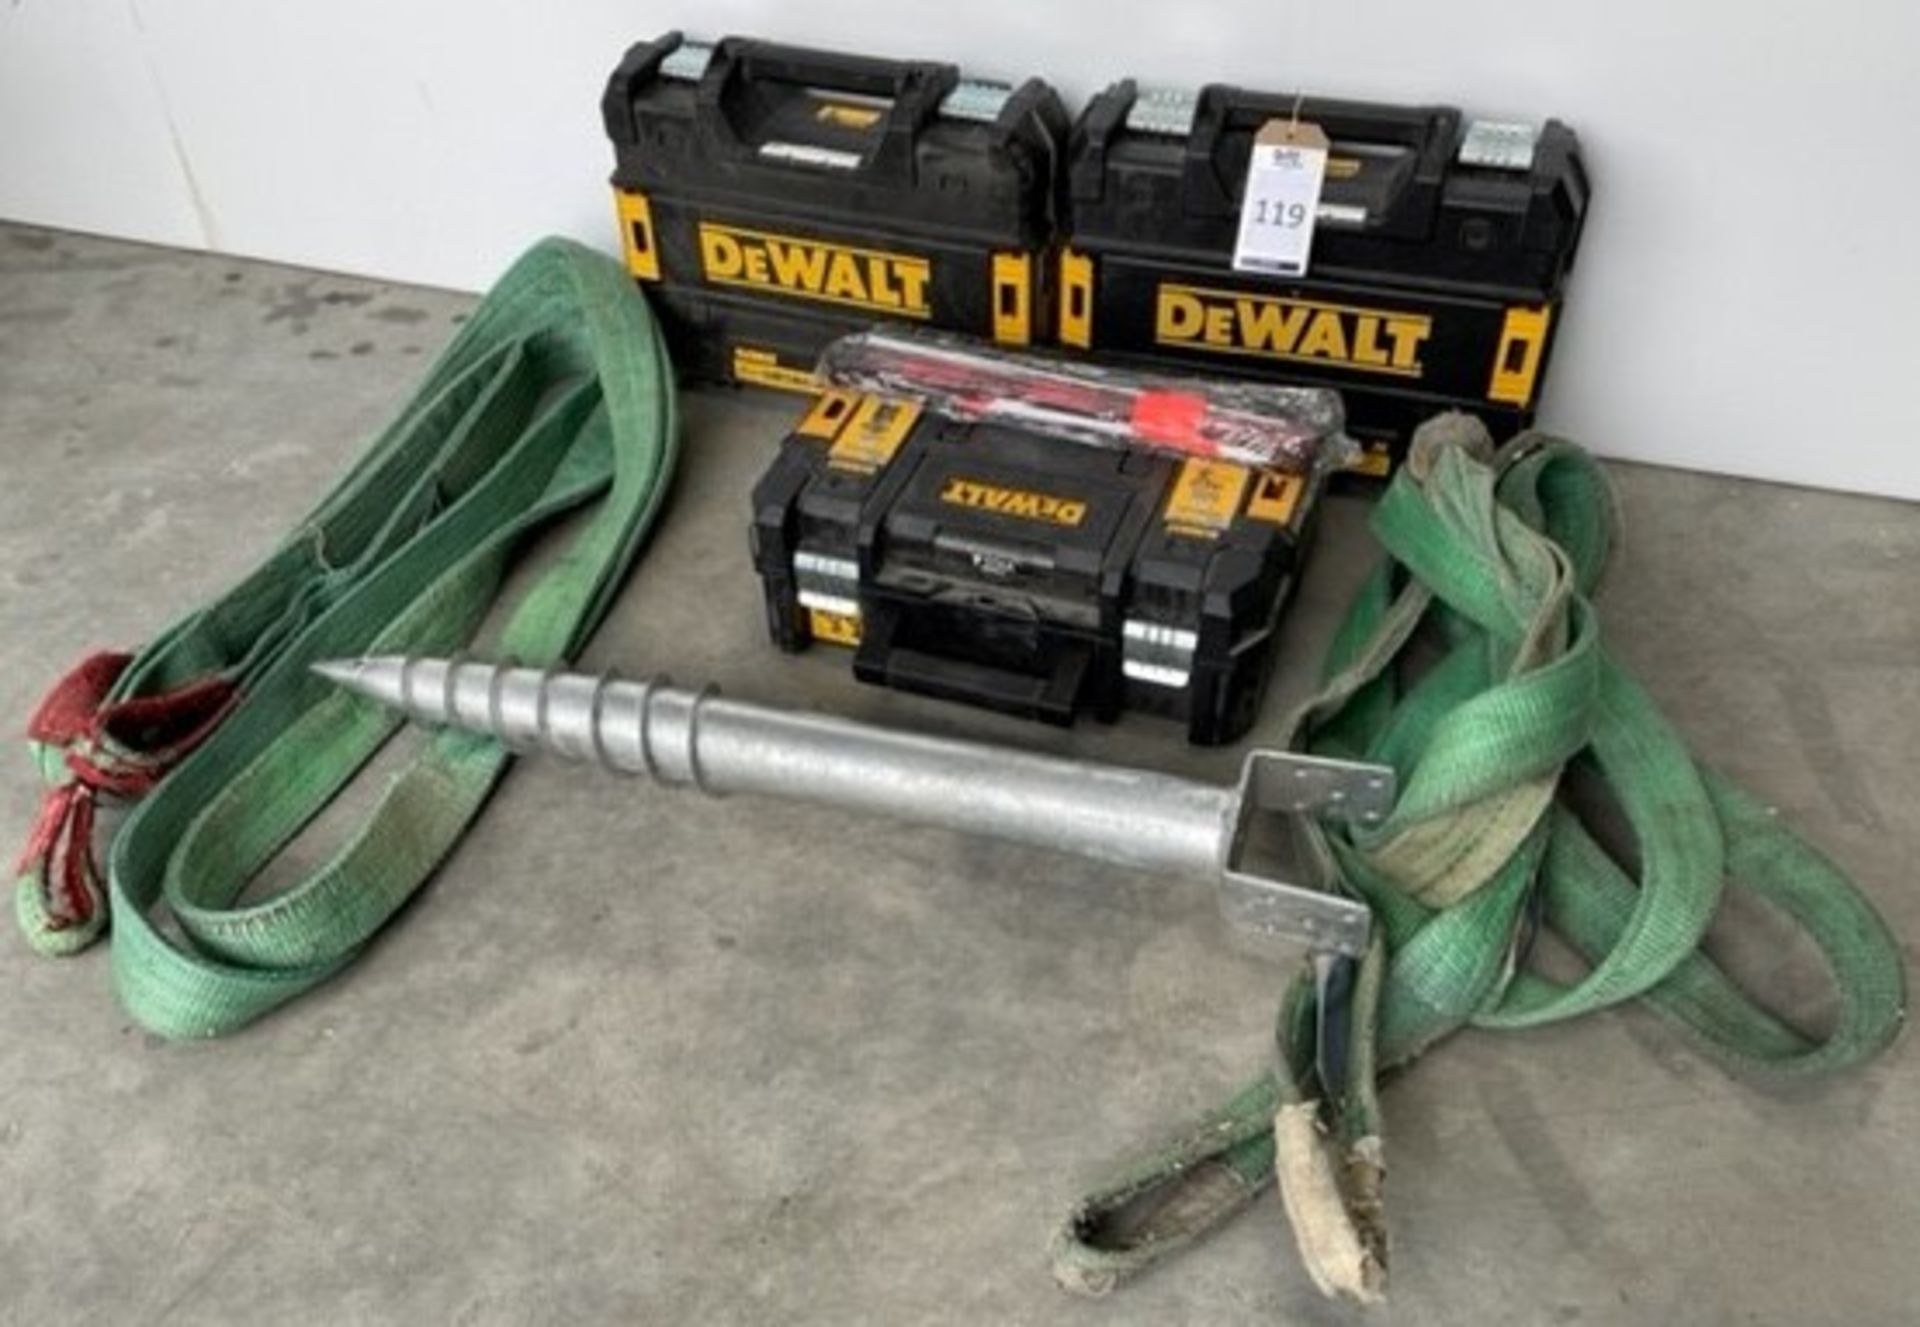 3 DeWalt Cases, 2 Lifting Straps & Ground Anchor (Located: Brentwood. Please Refer to General